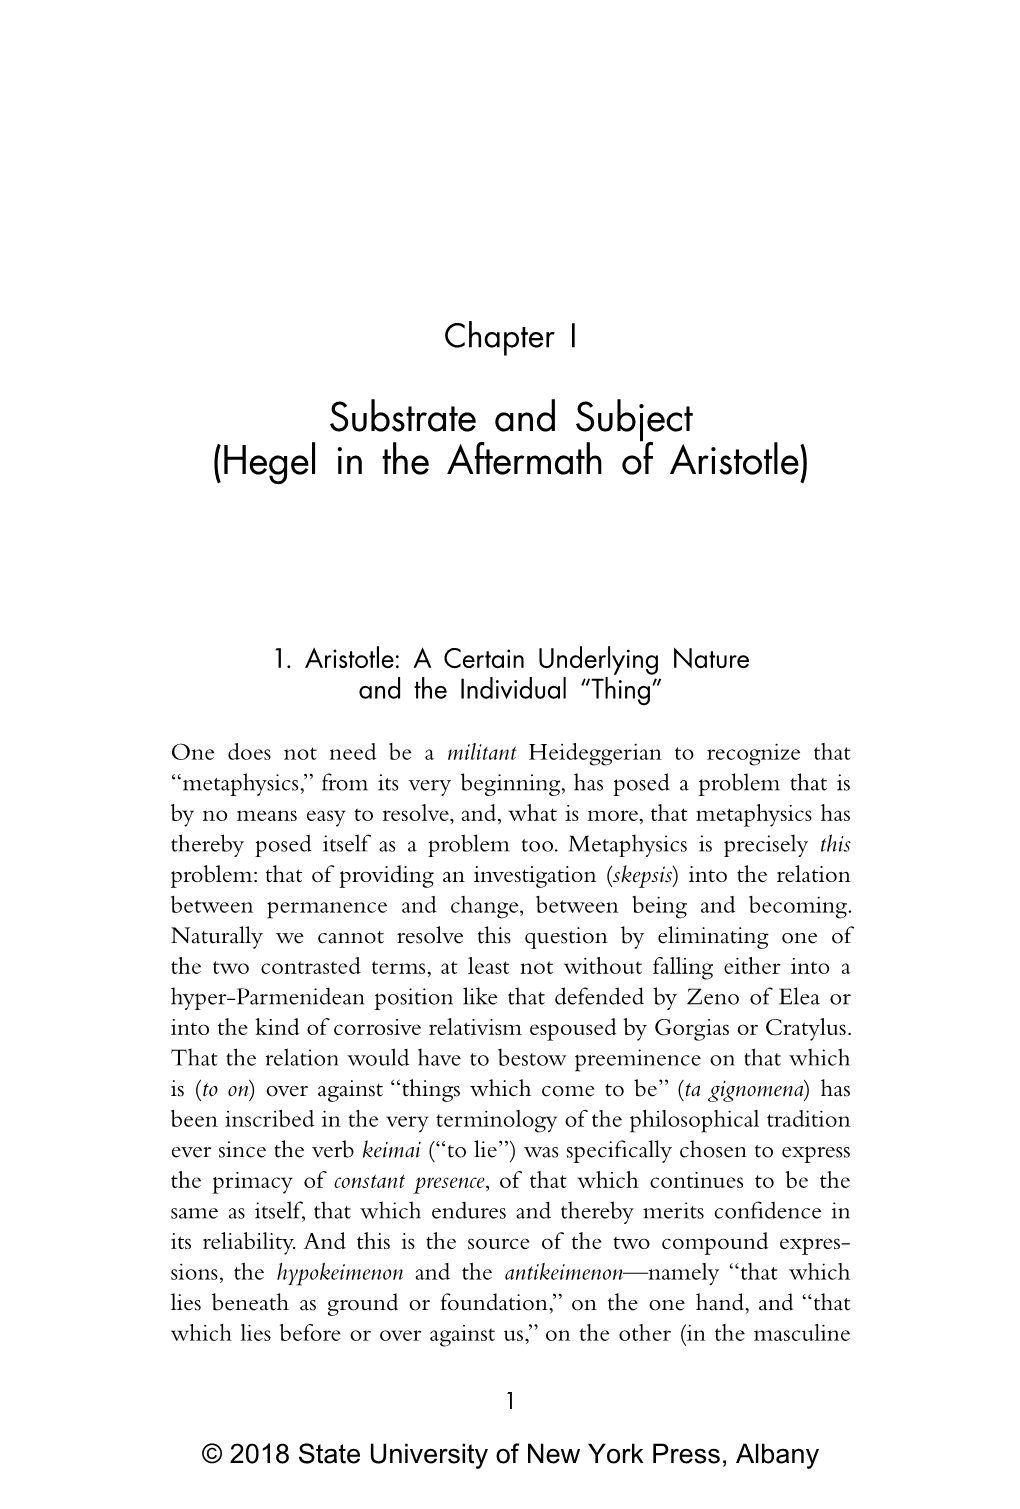 Substrate and Subject (Hegel in the Aftermath of Aristotle)